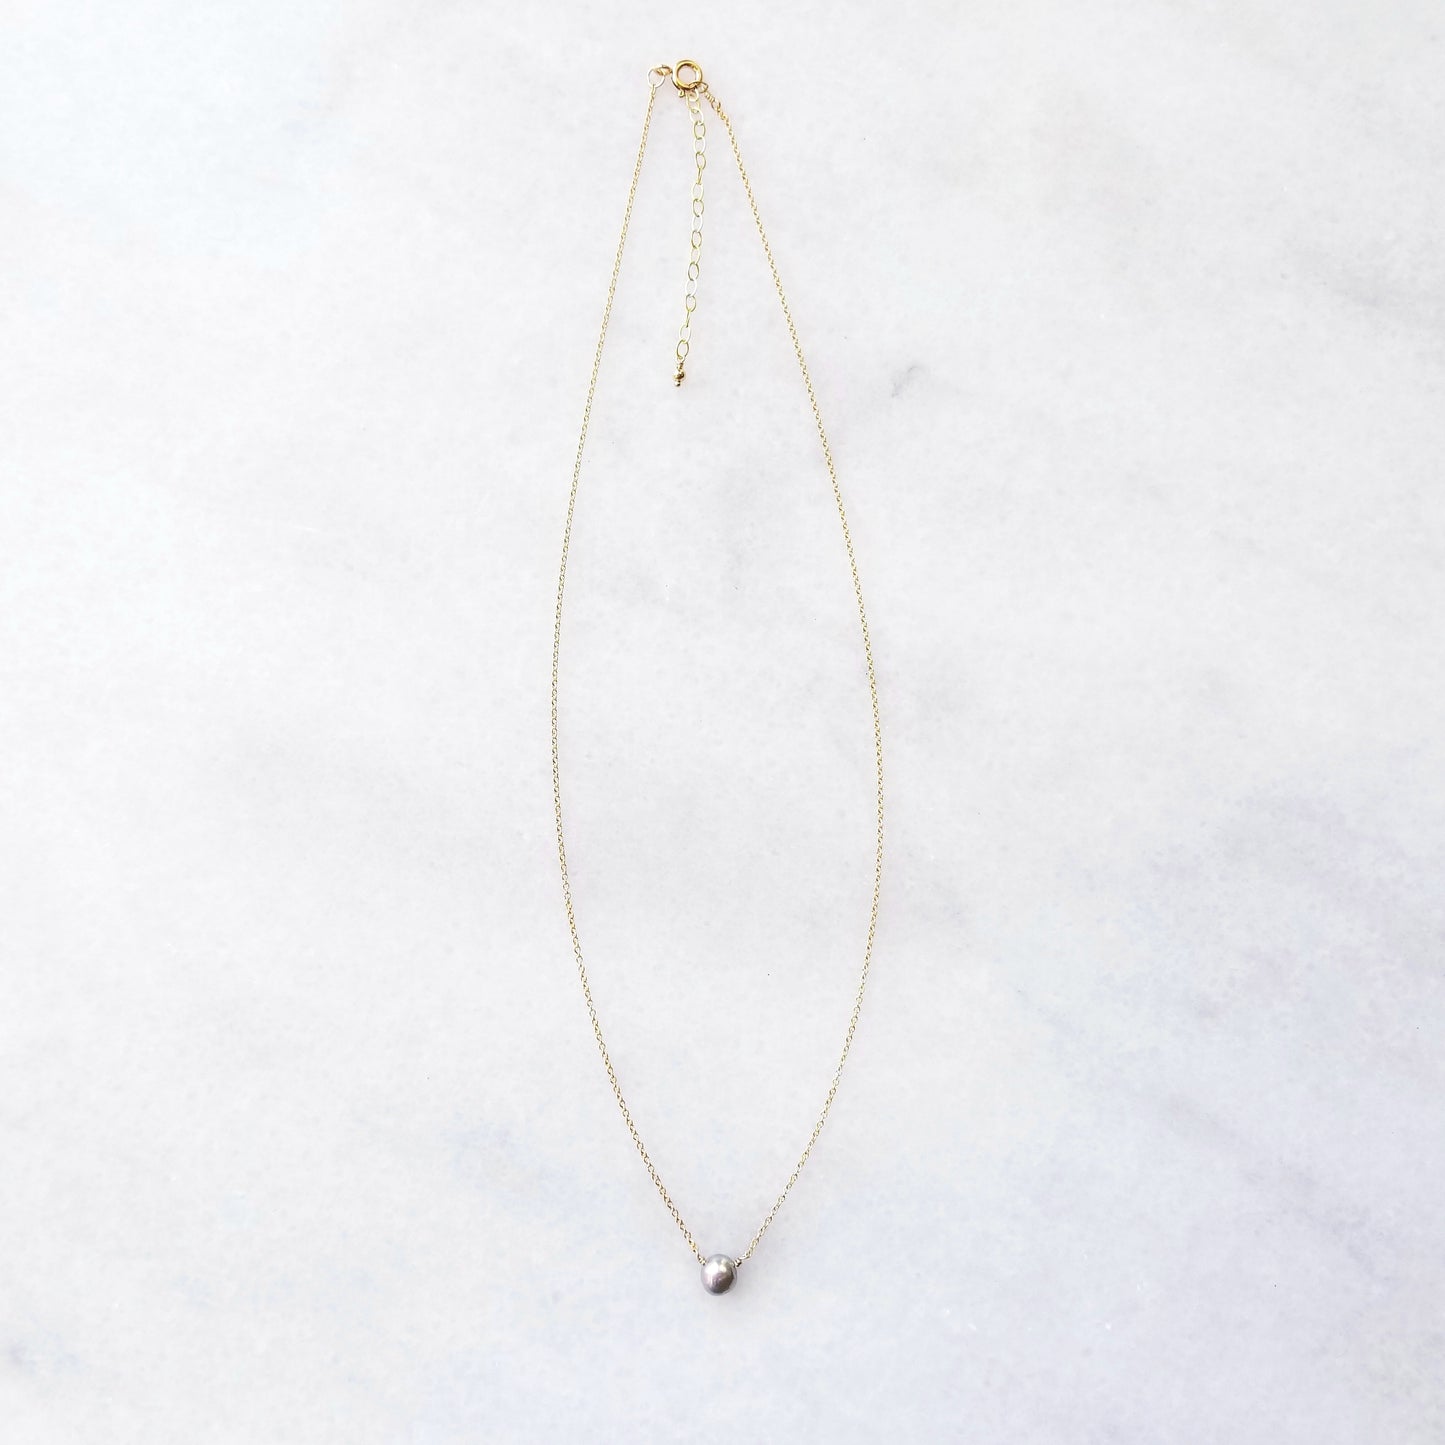 Light Grey Pearl Solitaire Necklace